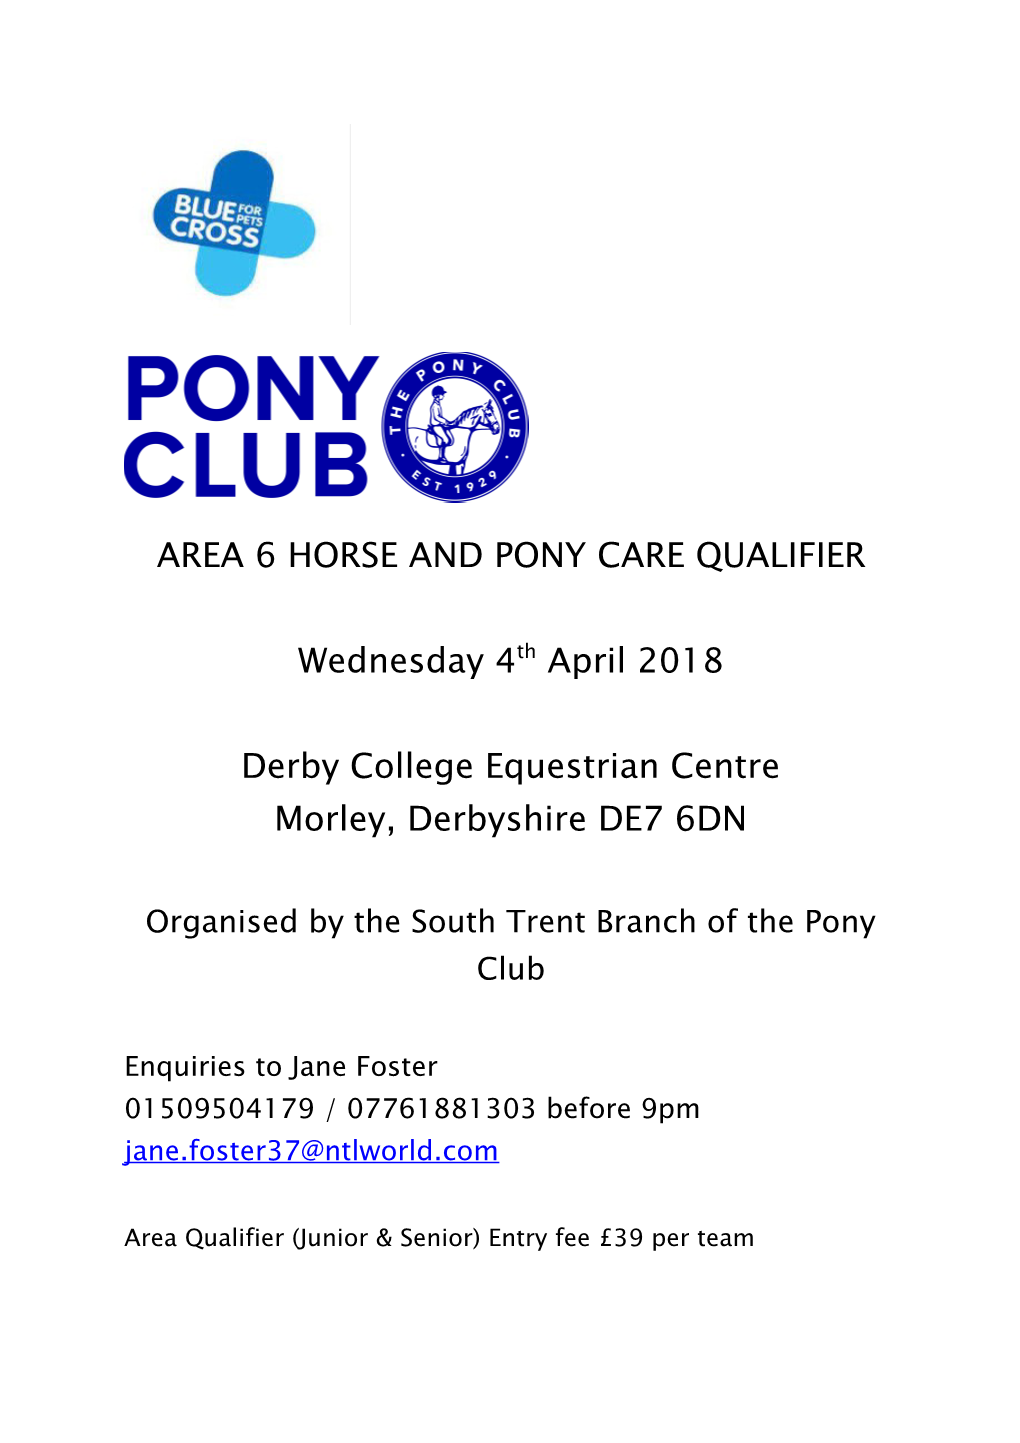 Area 6 Horse and Pony Care Qualifier